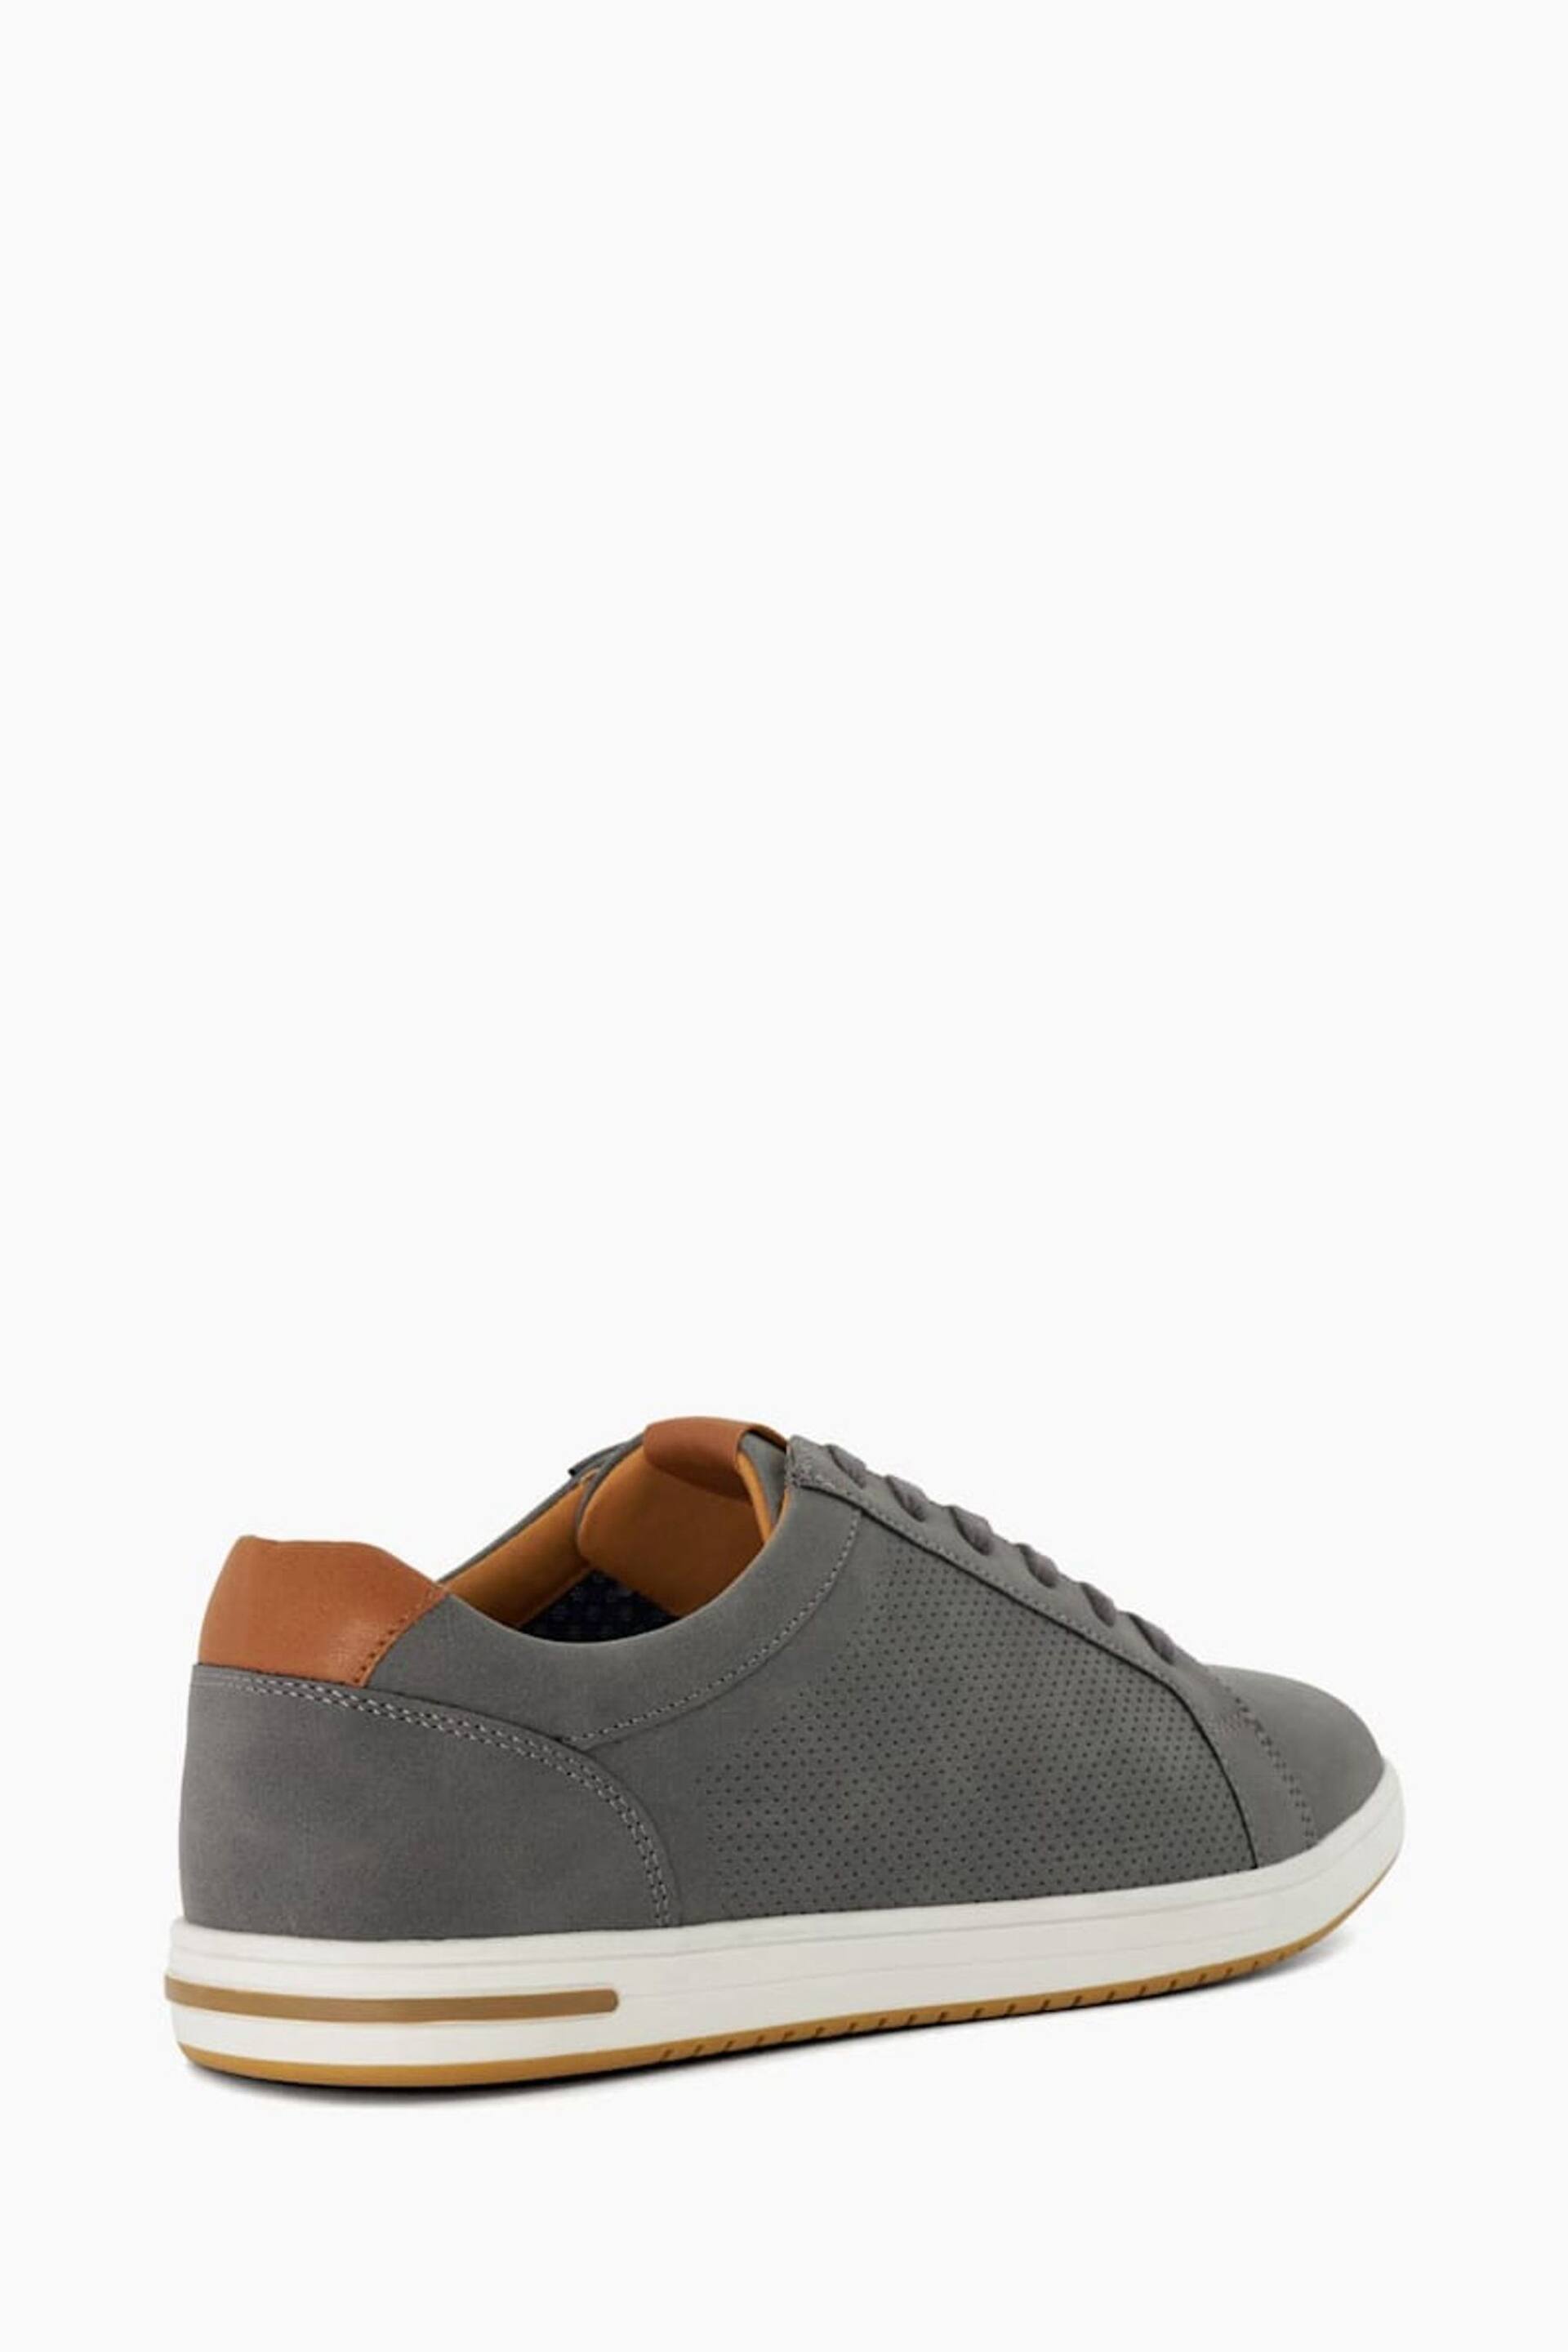 Dune London Grey Wide Fit Tezzy Perf Trainers - Image 2 of 6